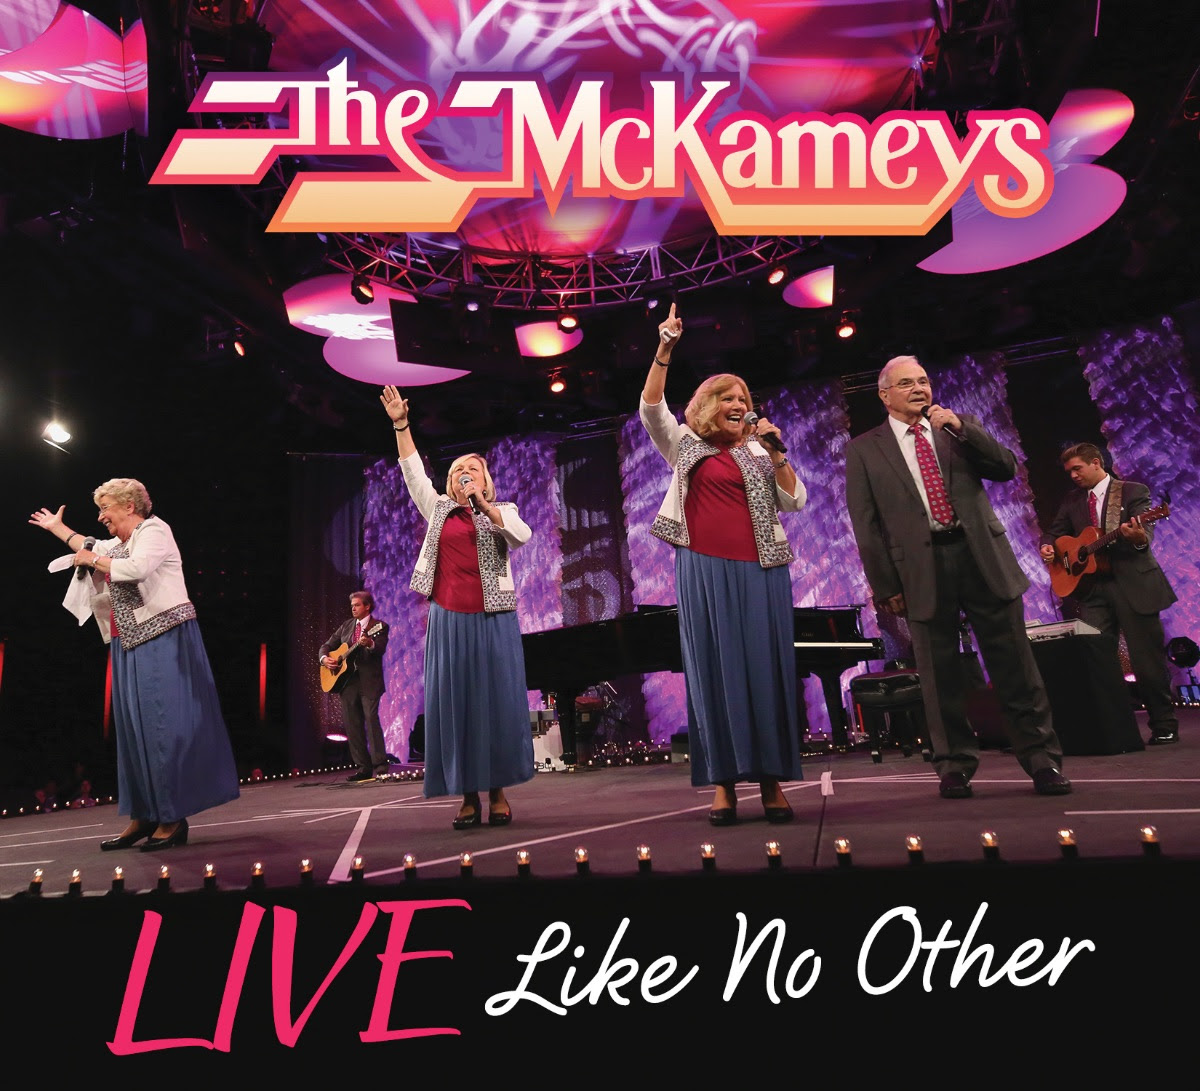 The McKameys release LIVE Like No Other